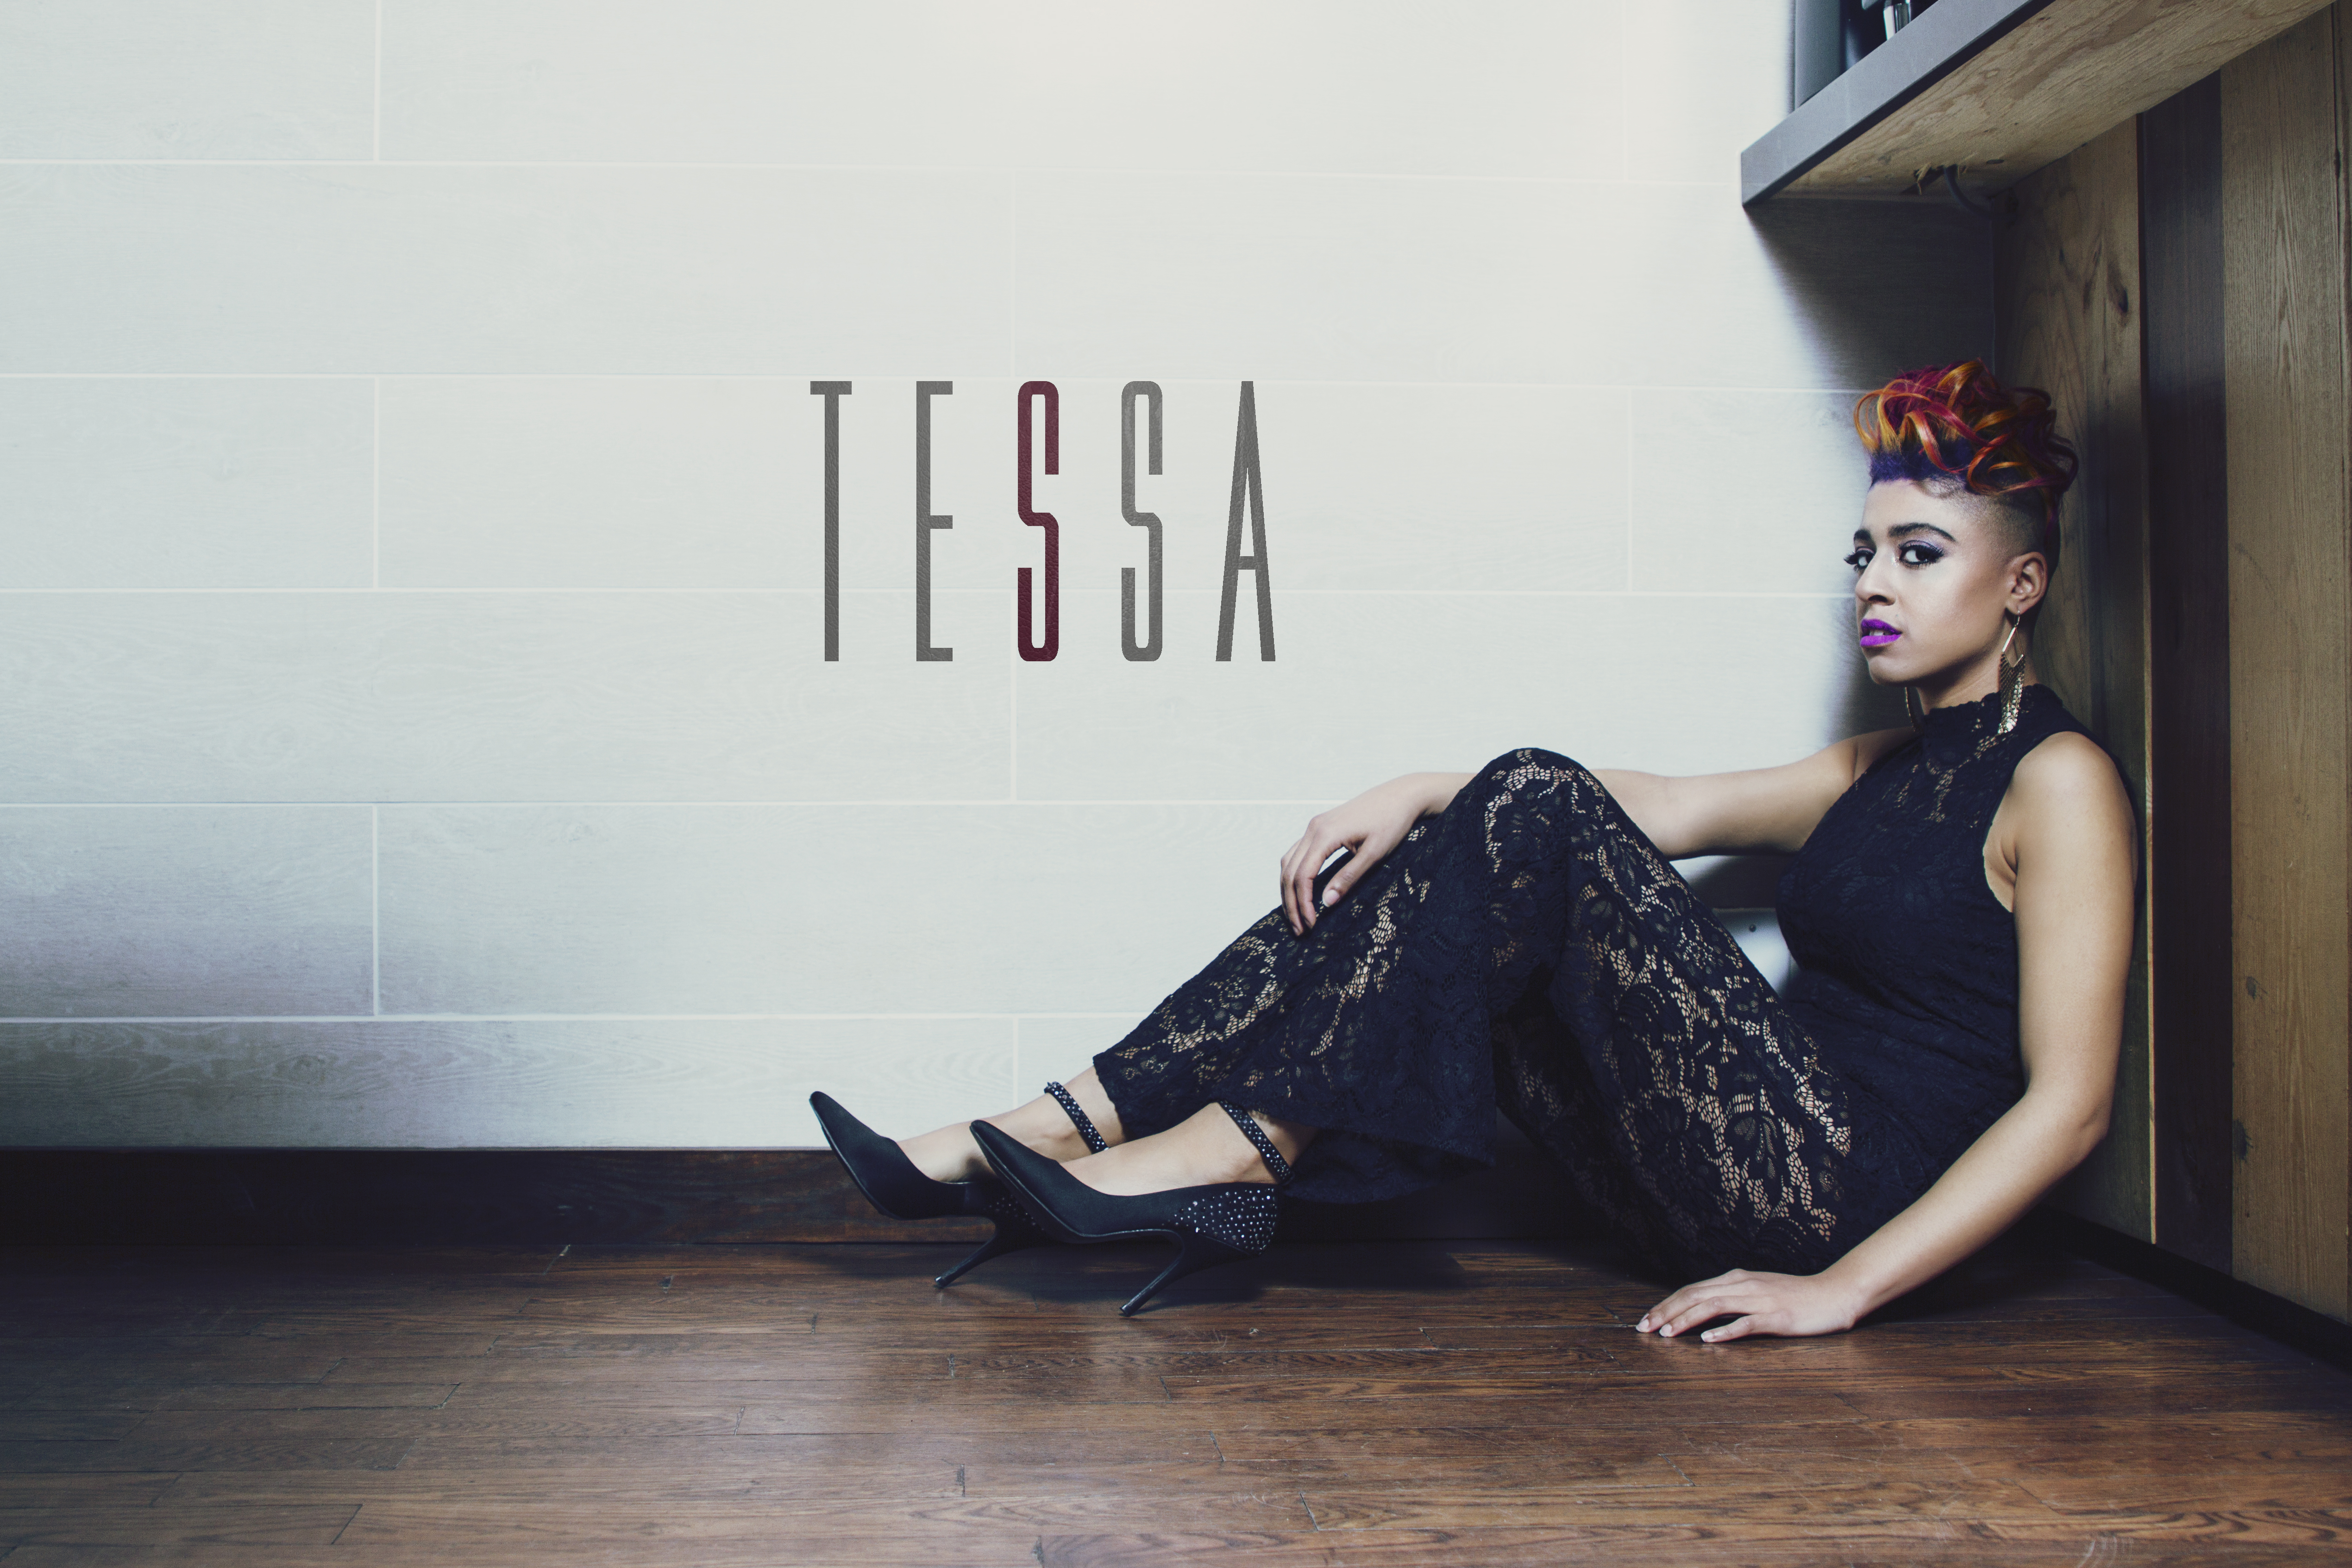 R&B Artist Tessa is About to Take a Big Step With USA Tour